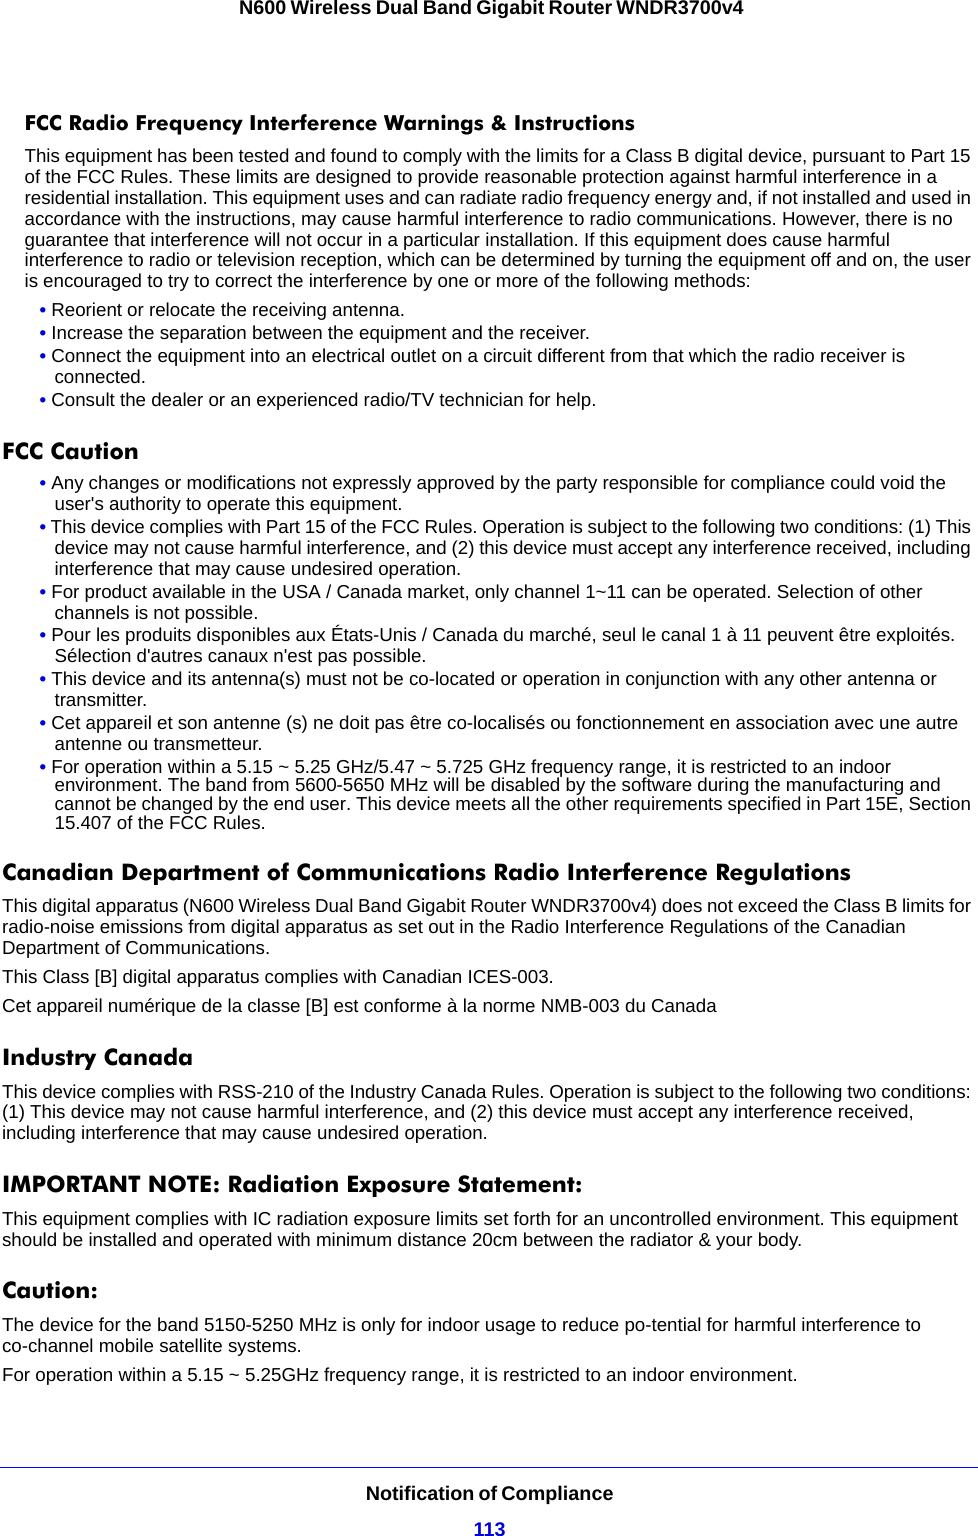 Notification of Compliance113 N600 Wireless Dual Band Gigabit Router WNDR3700v4FCC Radio Frequency Interference Warnings &amp; InstructionsThis equipment has been tested and found to comply with the limits for a Class B digital device, pursuant to Part 15 of the FCC Rules. These limits are designed to provide reasonable protection against harmful interference in a residential installation. This equipment uses and can radiate radio frequency energy and, if not installed and used in accordance with the instructions, may cause harmful interference to radio communications. However, there is no guarantee that interference will not occur in a particular installation. If this equipment does cause harmful interference to radio or television reception, which can be determined by turning the equipment off and on, the user is encouraged to try to correct the interference by one or more of the following methods:• Reorient or relocate the receiving antenna.• Increase the separation between the equipment and the receiver.• Connect the equipment into an electrical outlet on a circuit different from that which the radio receiver is connected.• Consult the dealer or an experienced radio/TV technician for help.FCC Caution• Any changes or modifications not expressly approved by the party responsible for compliance could void the user&apos;s authority to operate this equipment. • This device complies with Part 15 of the FCC Rules. Operation is subject to the following two conditions: (1) This device may not cause harmful interference, and (2) this device must accept any interference received, including interference that may cause undesired operation. • For product available in the USA / Canada market, only channel 1~11 can be operated. Selection of other channels is not possible.• Pour les produits disponibles aux États-Unis / Canada du marché, seul le canal 1 à 11 peuvent être exploités. Sélection d&apos;autres canaux n&apos;est pas possible.• This device and its antenna(s) must not be co-located or operation in conjunction with any other antenna or transmitter.• Cet appareil et son antenne (s) ne doit pas être co-localisés ou fonctionnement en association avec une autre antenne ou transmetteur.• For operation within a 5.15 ~ 5.25 GHz/5.47 ~ 5.725 GHz frequency range, it is restricted to an indoor environment. The band from 5600-5650 MHz will be disabled by the software during the manufacturing and cannot be changed by the end user. This device meets all the other requirements specified in Part 15E, Section 15.407 of the FCC Rules.Canadian Department of Communications Radio Interference RegulationsThis digital apparatus (N600 Wireless Dual Band Gigabit Router WNDR3700v4) does not exceed the Class B limits for radio-noise emissions from digital apparatus as set out in the Radio Interference Regulations of the Canadian Department of Communications.This Class [B] digital apparatus complies with Canadian ICES-003.Cet appareil numérique de la classe [B] est conforme à la norme NMB-003 du CanadaIndustry CanadaThis device complies with RSS-210 of the Industry Canada Rules. Operation is subject to the following two conditions: (1) This device may not cause harmful interference, and (2) this device must accept any interference received, including interference that may cause undesired operation.IMPORTANT NOTE: Radiation Exposure Statement:This equipment complies with IC radiation exposure limits set forth for an uncontrolled environment. This equipment should be installed and operated with minimum distance 20cm between the radiator &amp; your body.Caution:The device for the band 5150-5250 MHz is only for indoor usage to reduce po-tential for harmful interference to co-channel mobile satellite systems. For operation within a 5.15 ~ 5.25GHz frequency range, it is restricted to an indoor environment.